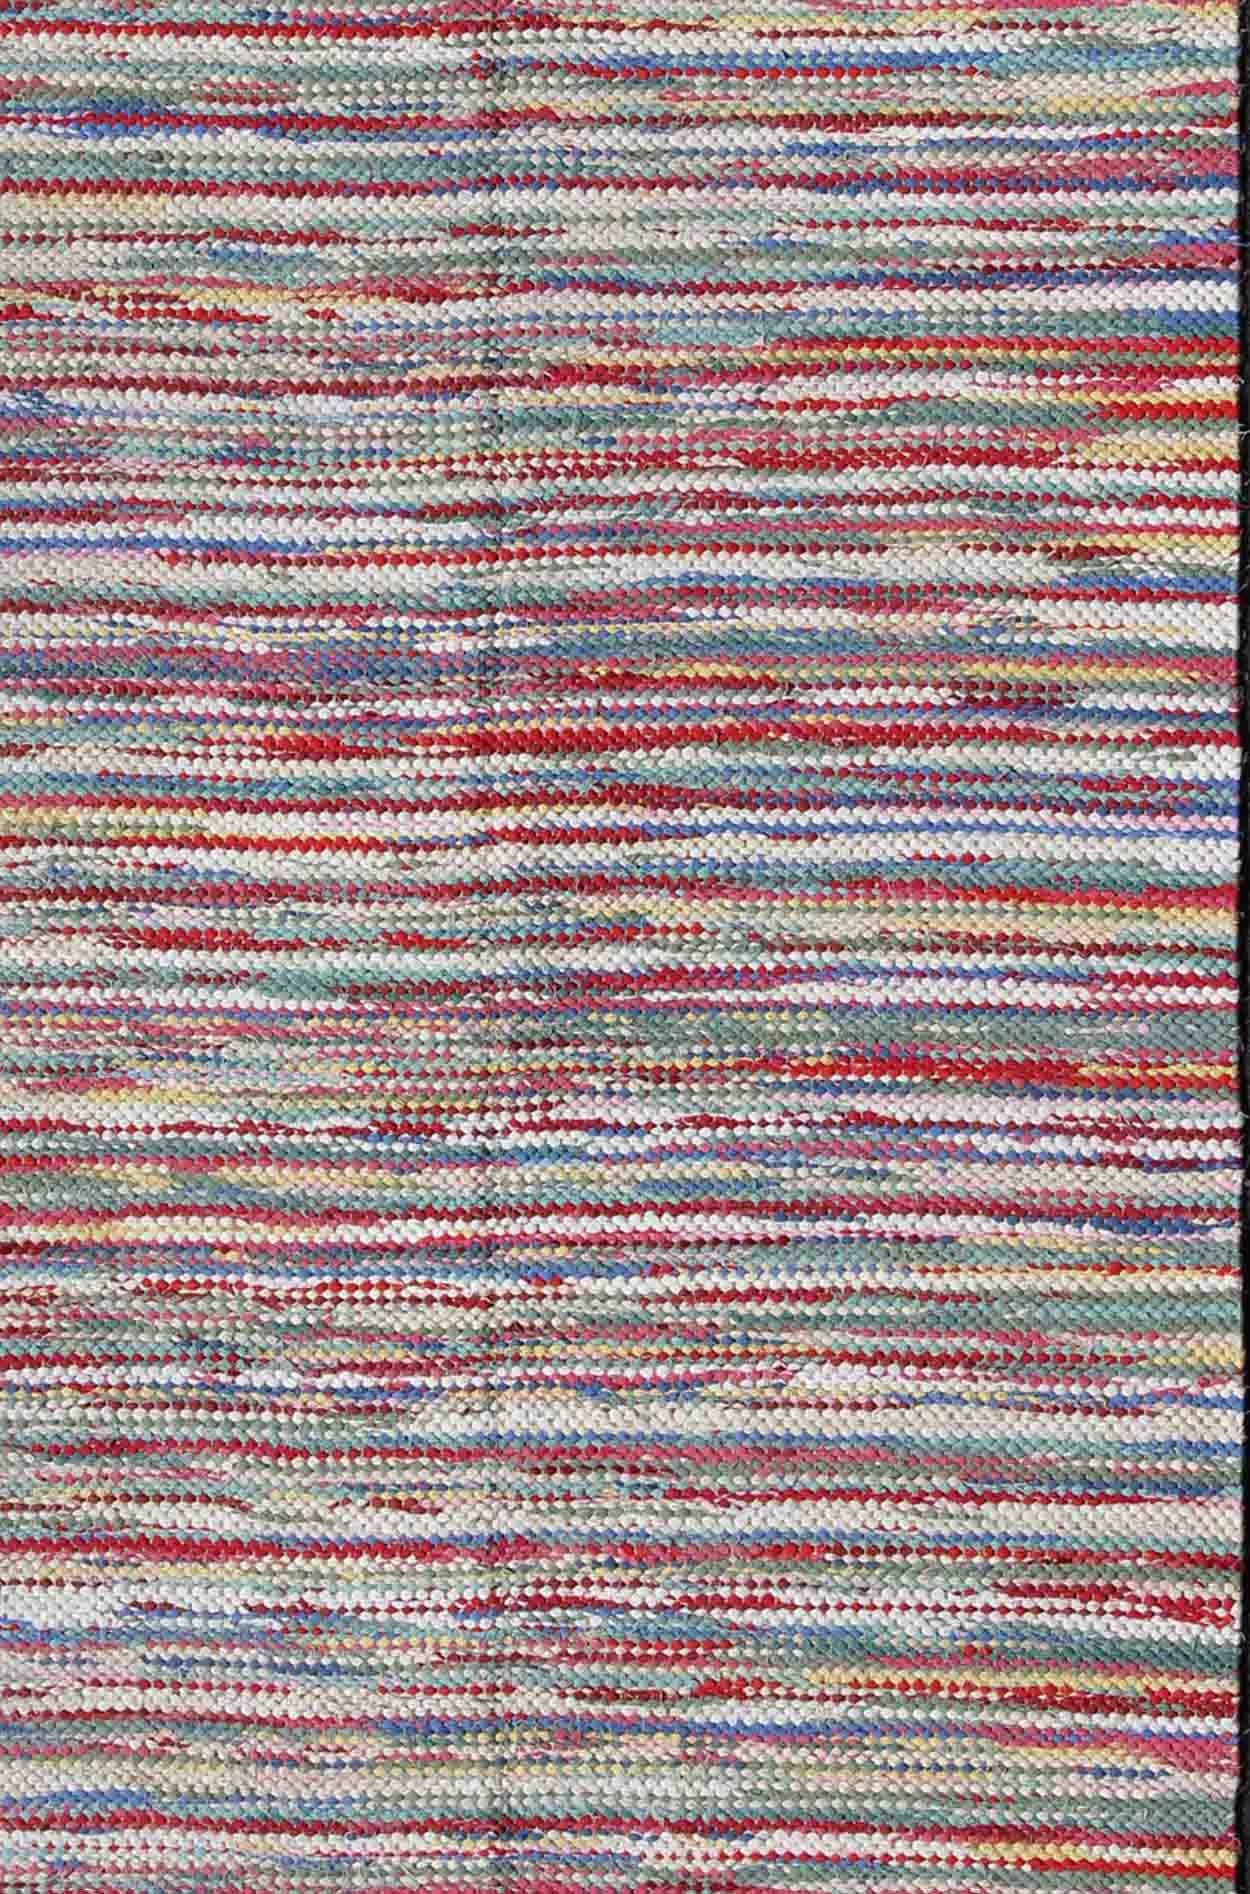 Hand-Woven Large Colorful American Braided Rug with Horizontal Stripes and Fringe Detail For Sale